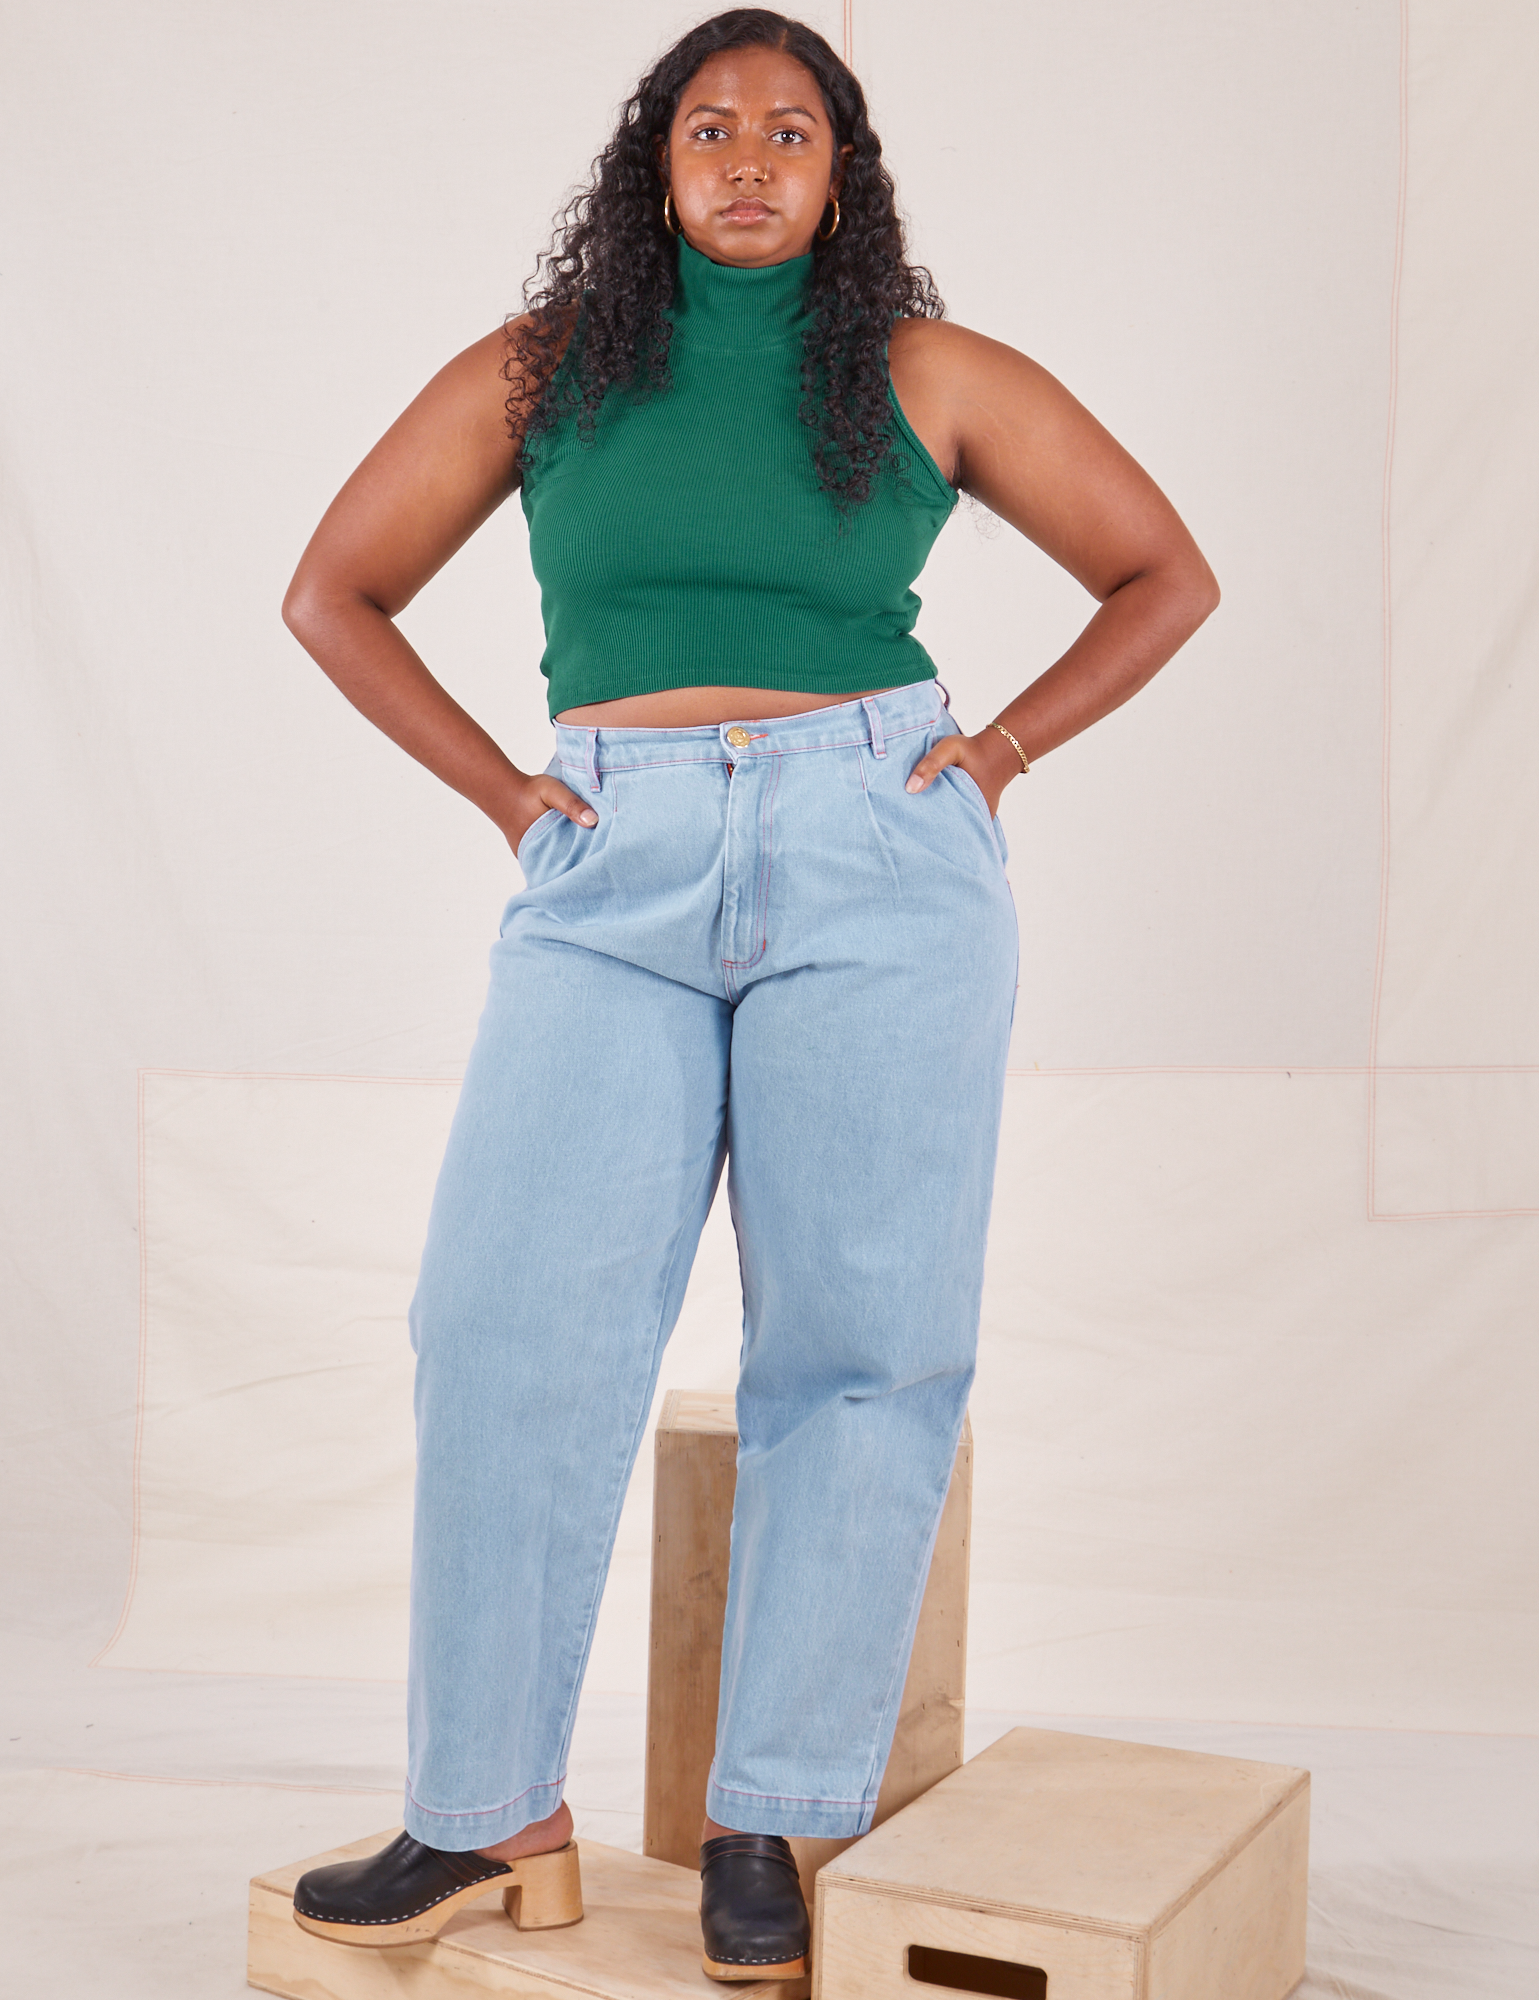 Meghna is 5&#39;8&quot; and wearing XS Sleeveless Essential Turtleneck in Hunter Green paired with light wash Denim Trousers